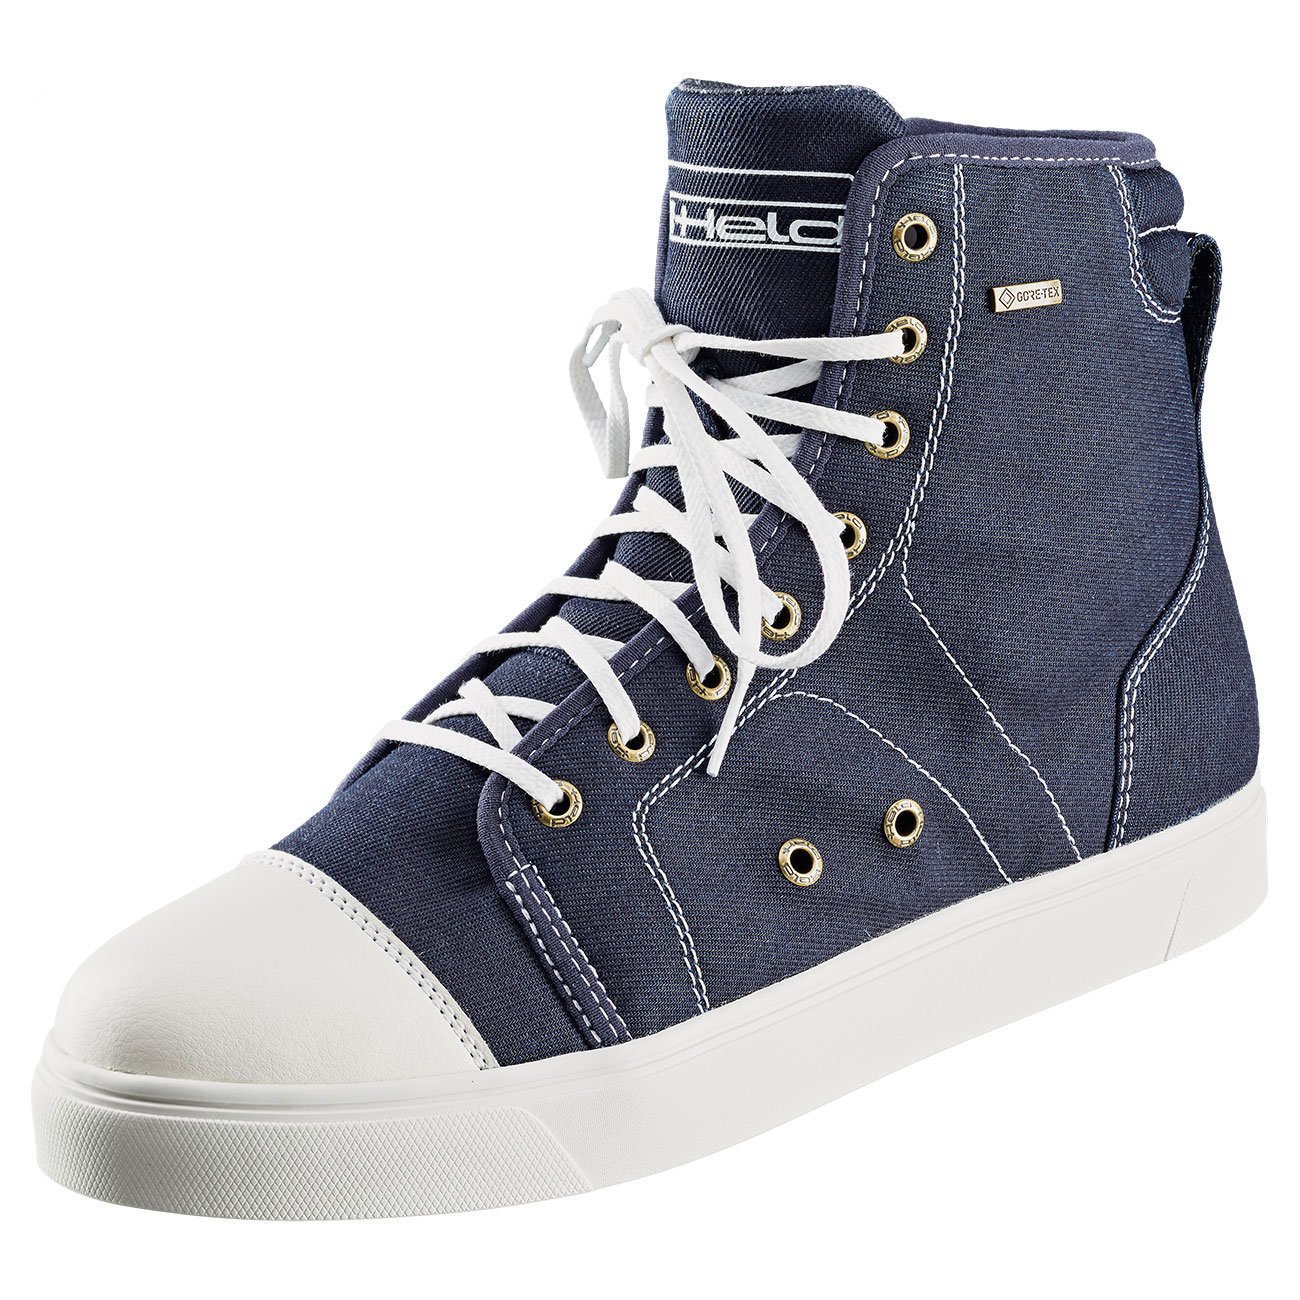 Image of Held College Rider GTX Bleu Chaussures Taille 37